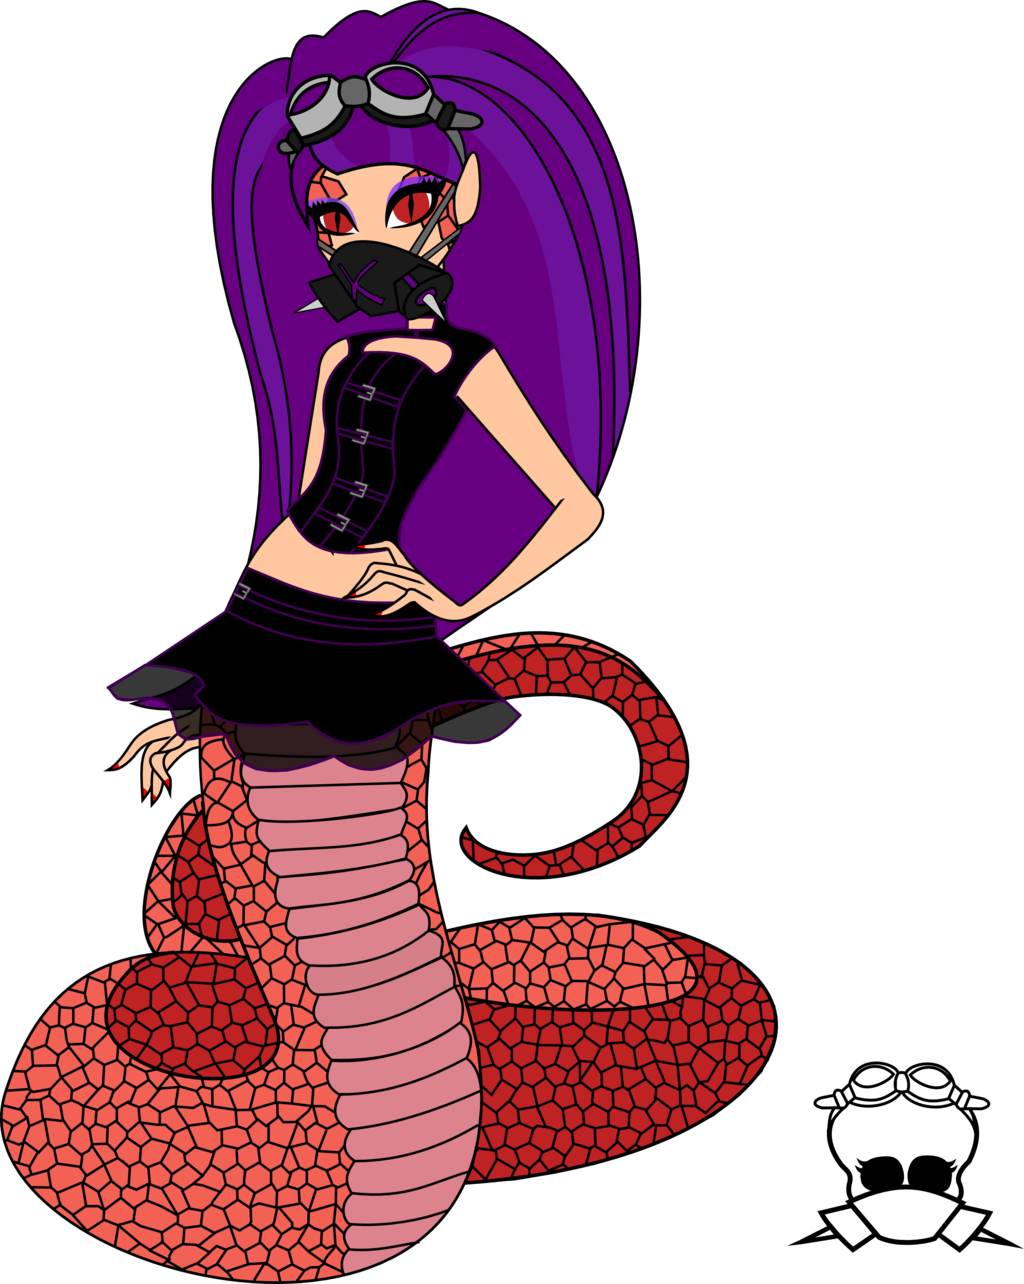 Monster High Oc Nagitita With Mask On Face By Laen666 - Monster High Bases Oc (1024x1284)